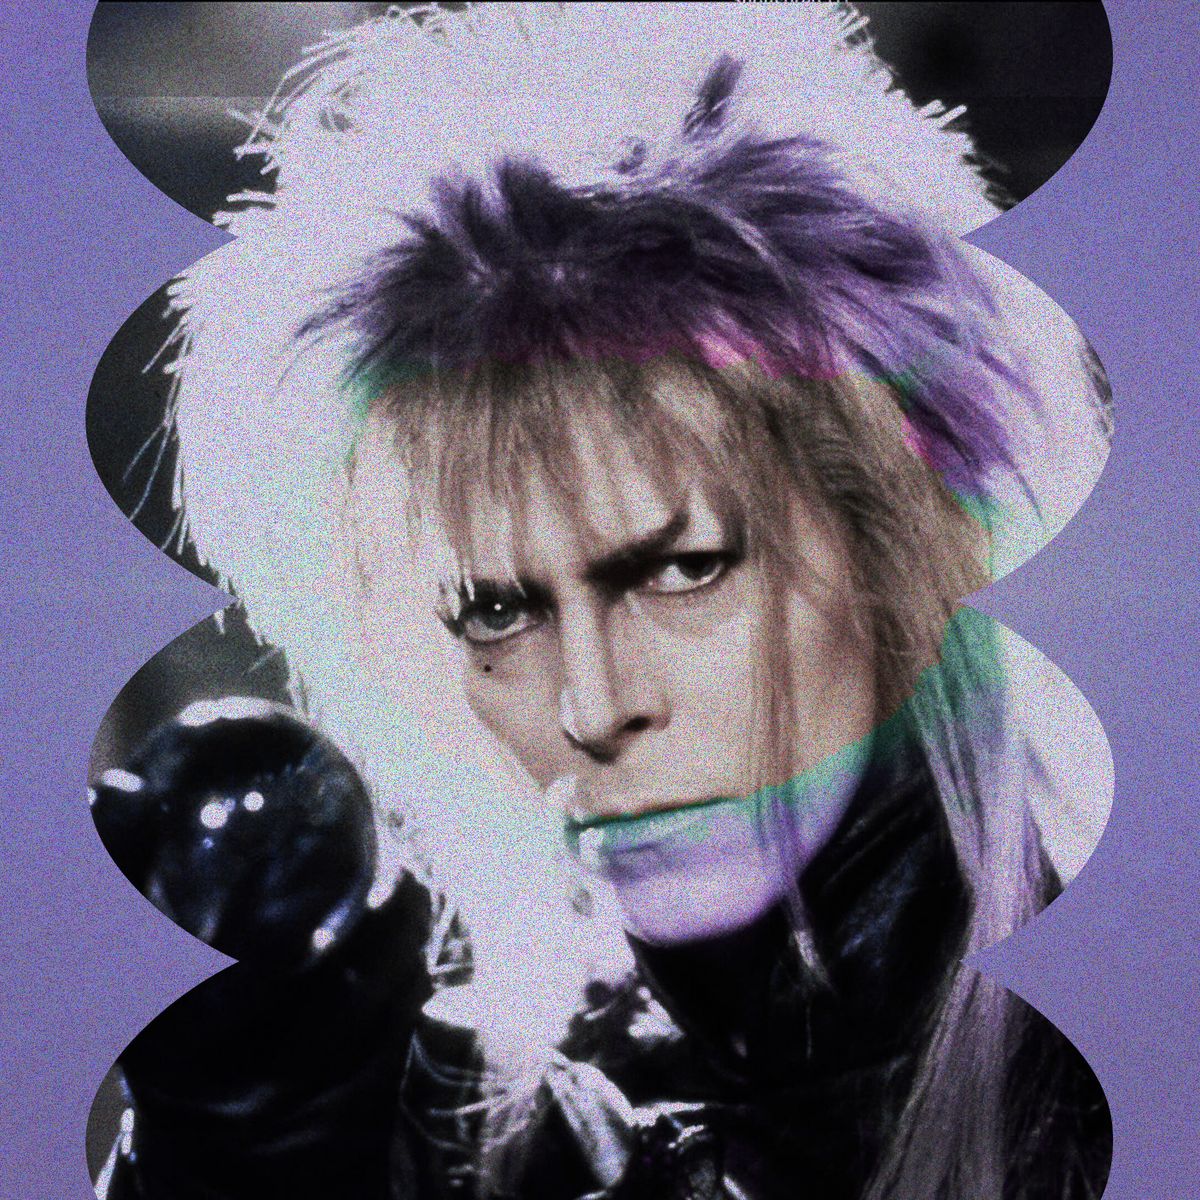 10 Things You Didn't Know About David Bowie's 'Labyrinth